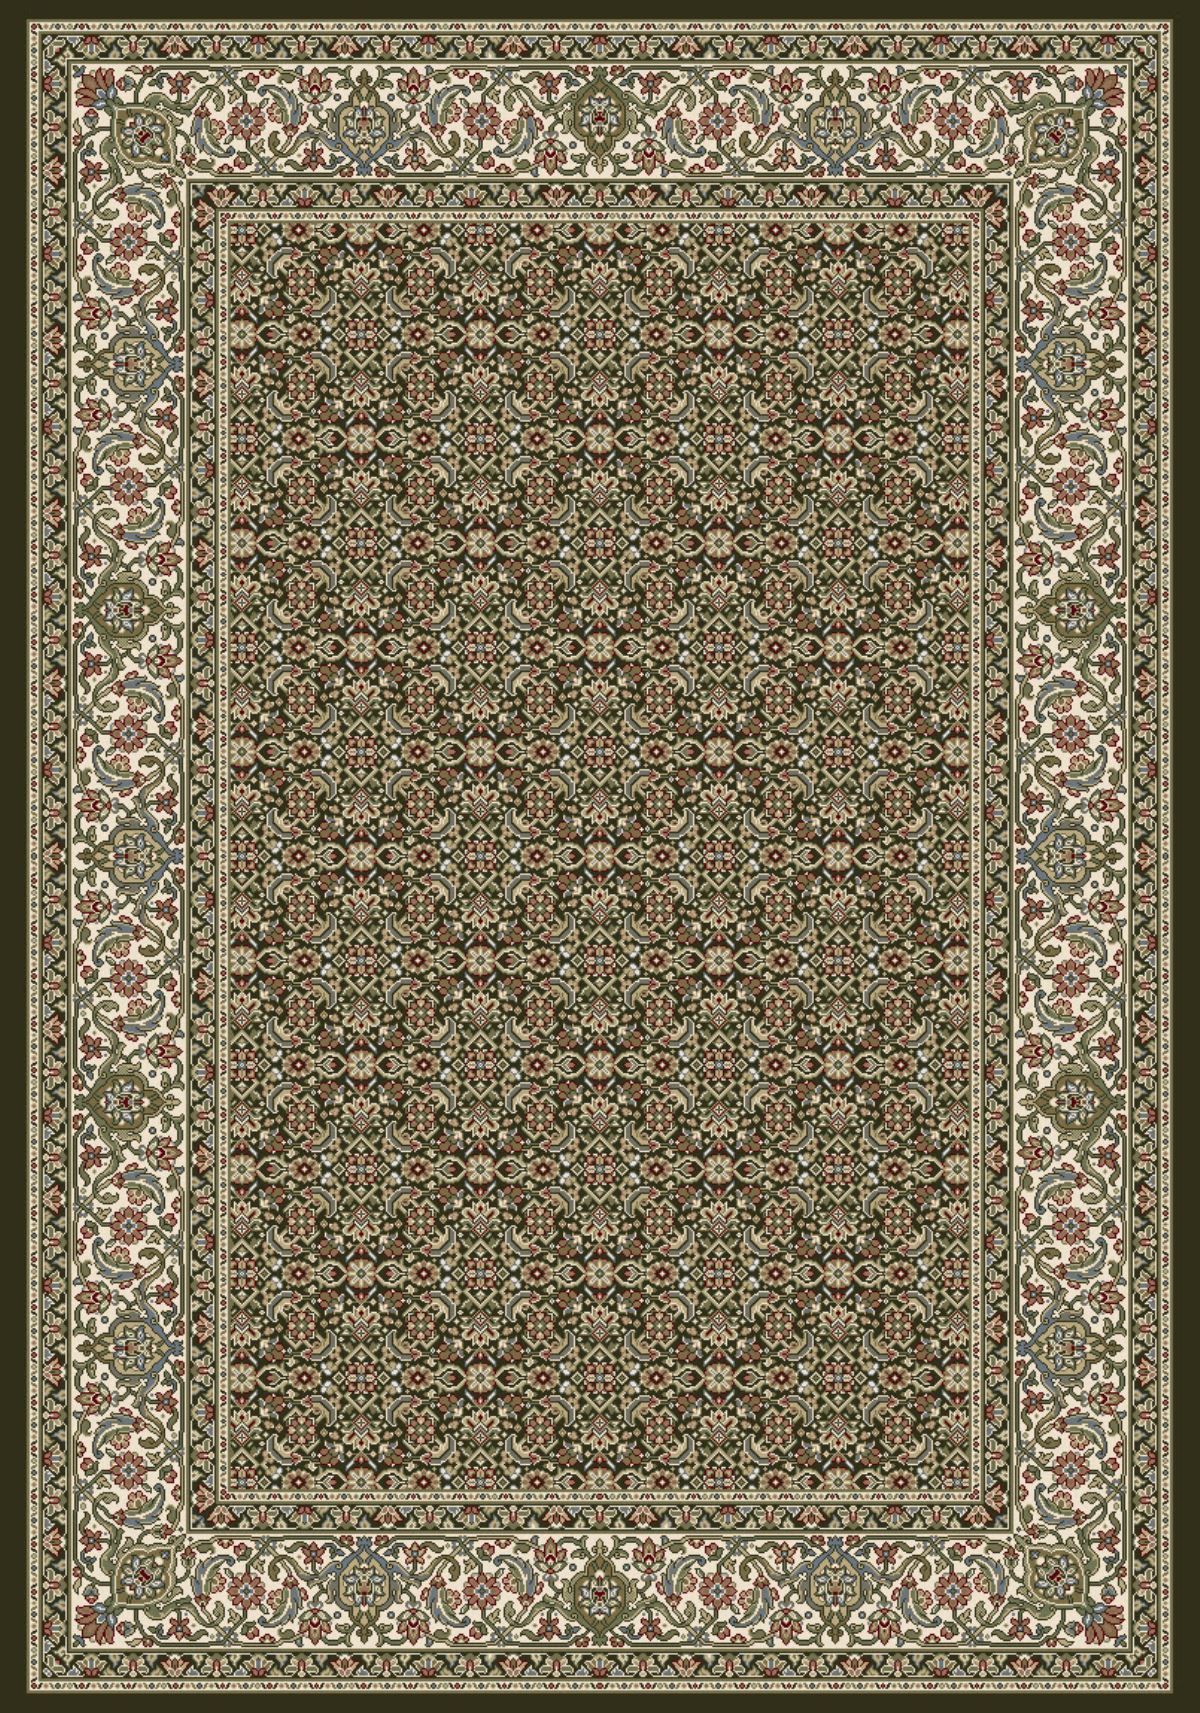 Black//Ivory 22 x 77 Dynamic Rugs AN28570113263 Ancient Garden Collection Runner Rug